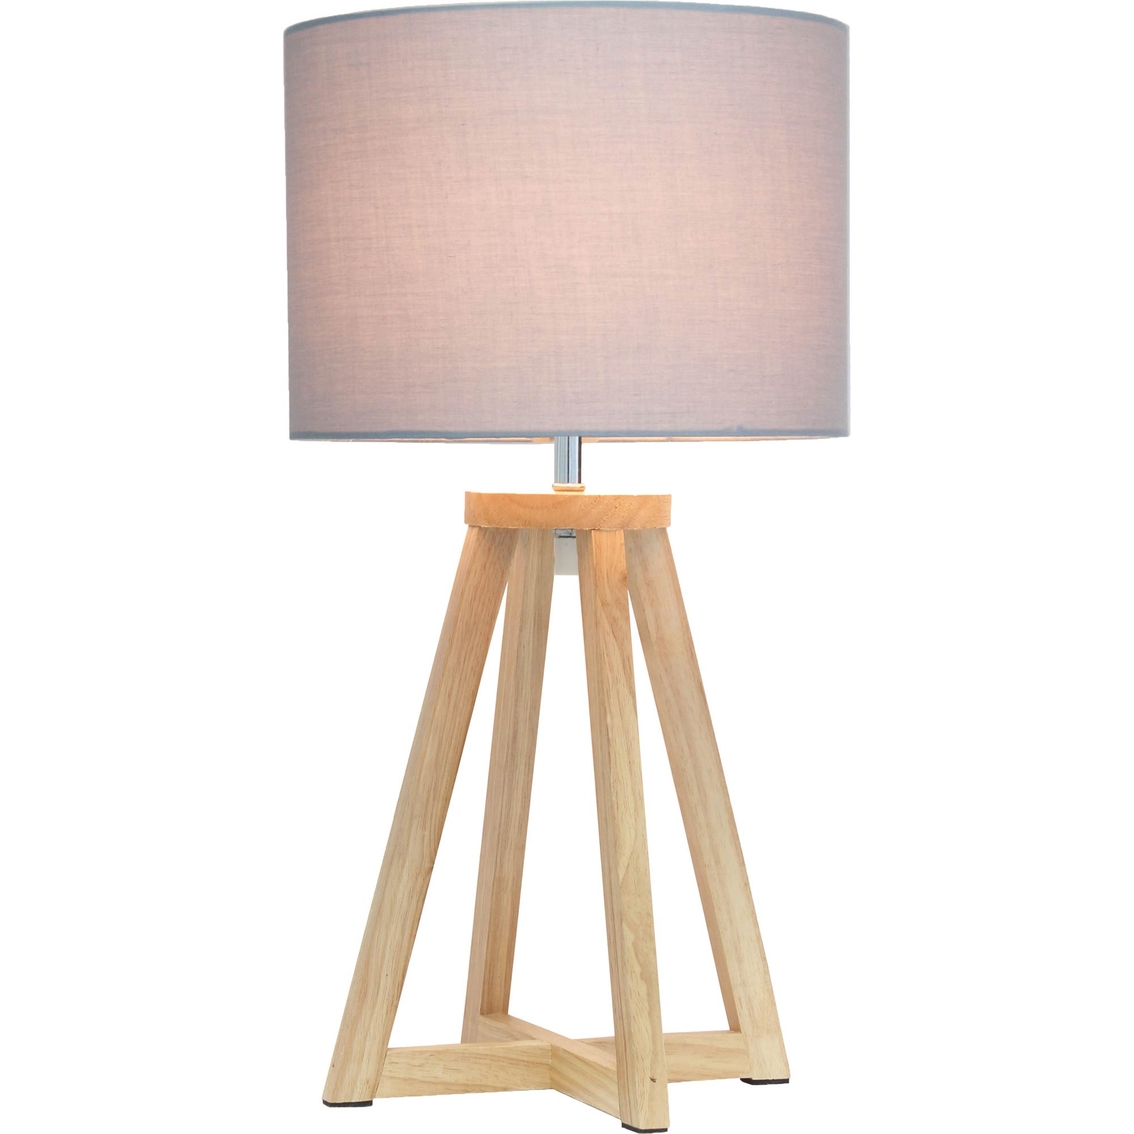 Simple Designs Triangular Wood 19 in. Table Lamp with Fabric Shade - Image 2 of 3